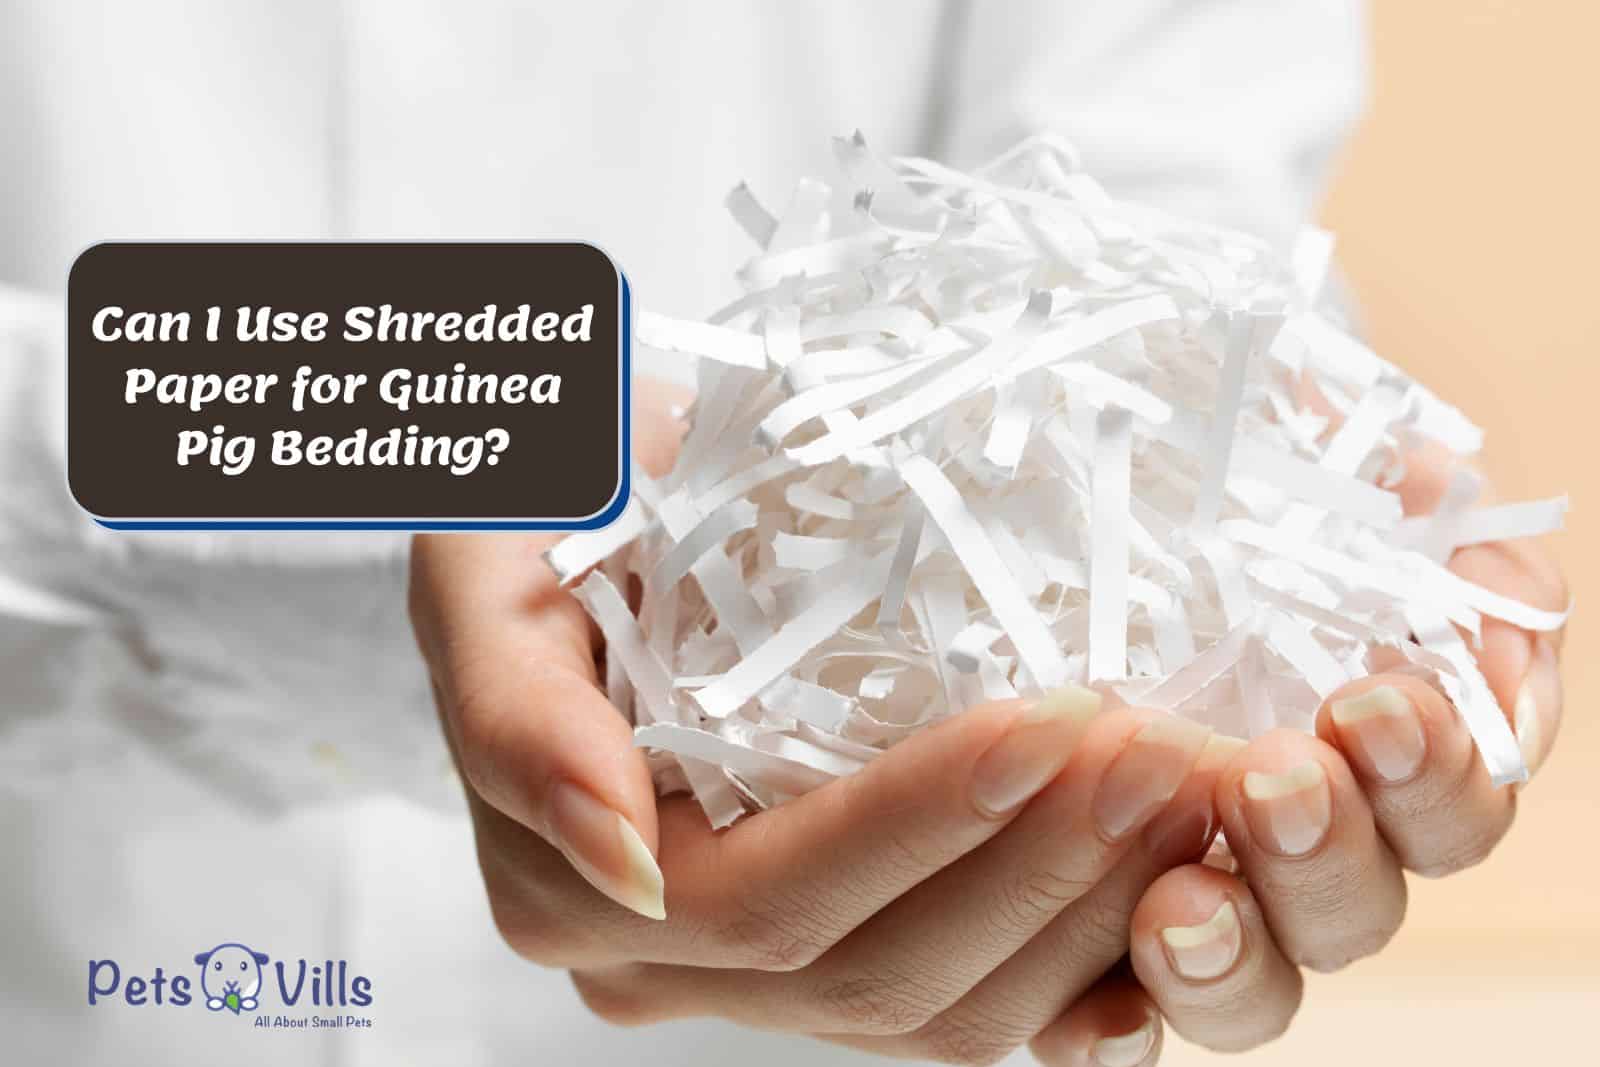 Can I Use Shredded Paper for Guinea Pig Bedding